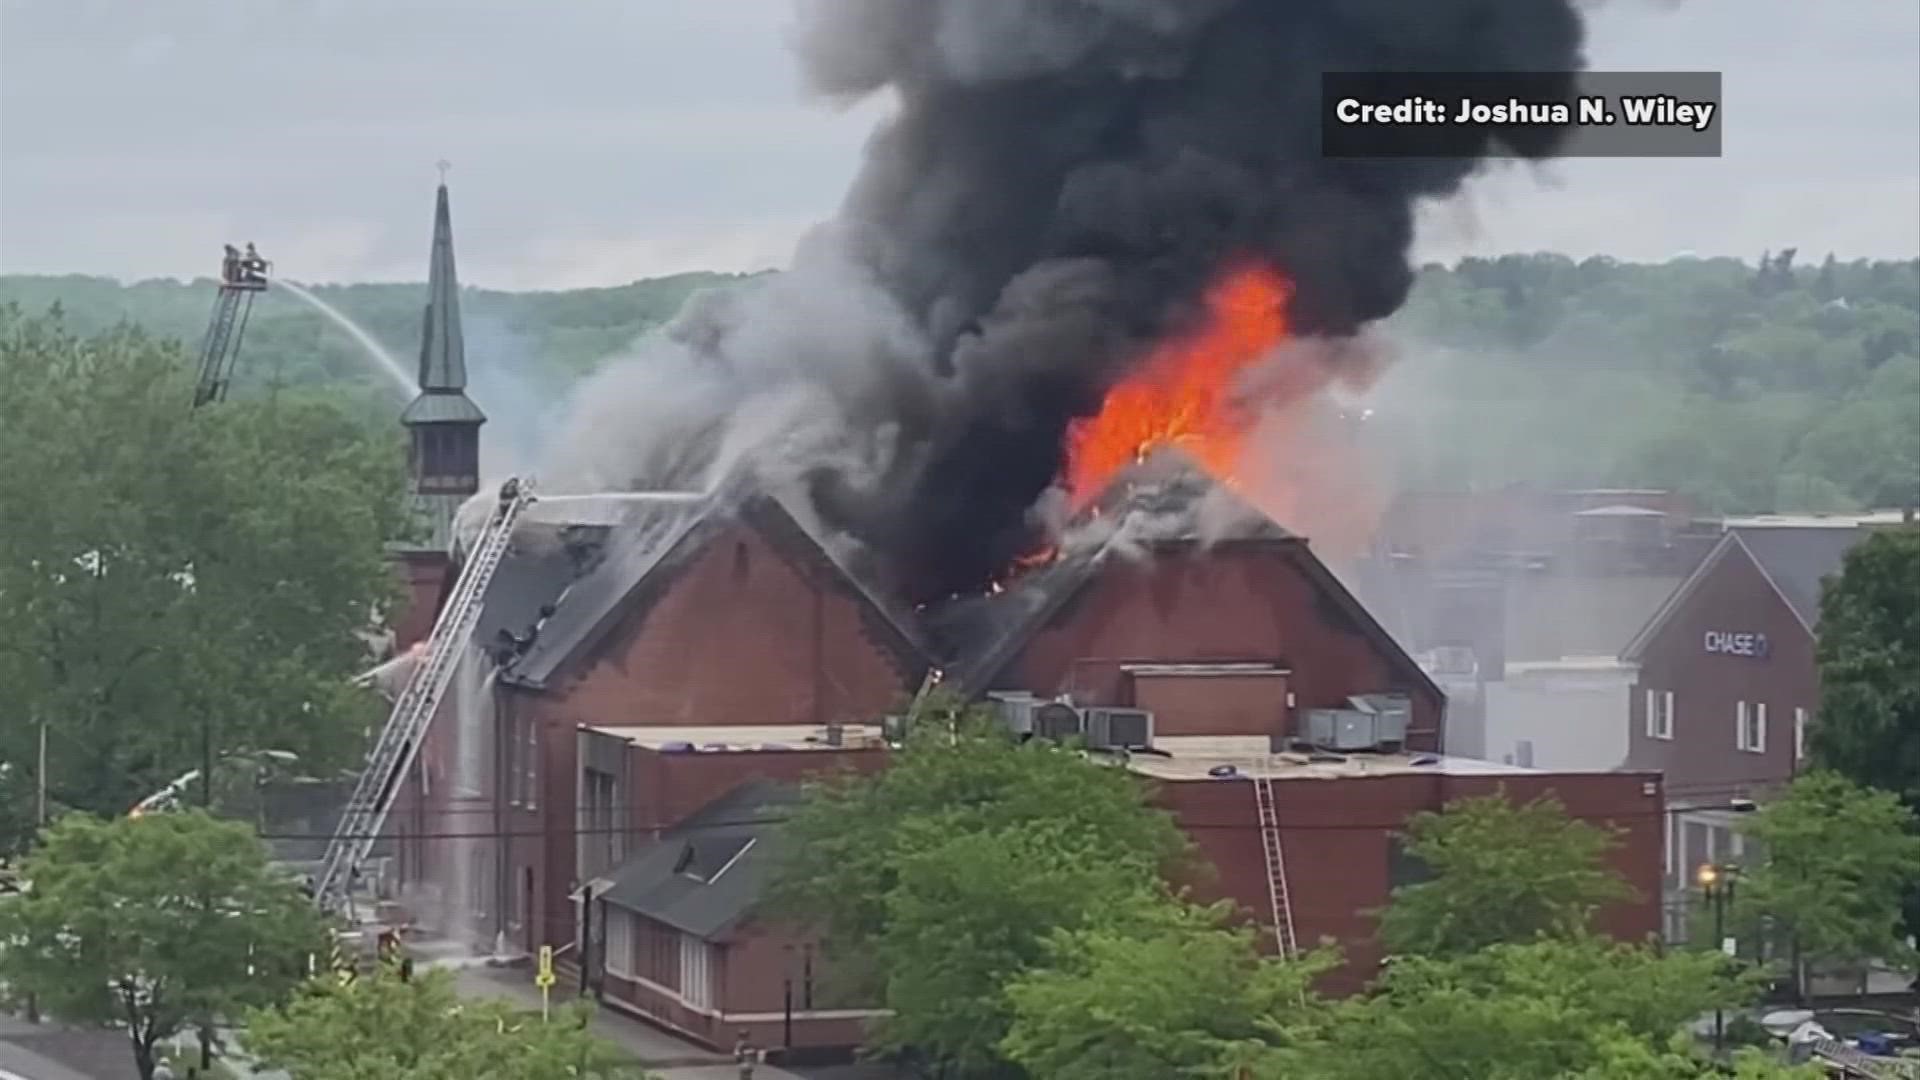 The fire was reported shortly after 10 a.m. at the Grace United Methodist Church, located at 422 Walnut Street.